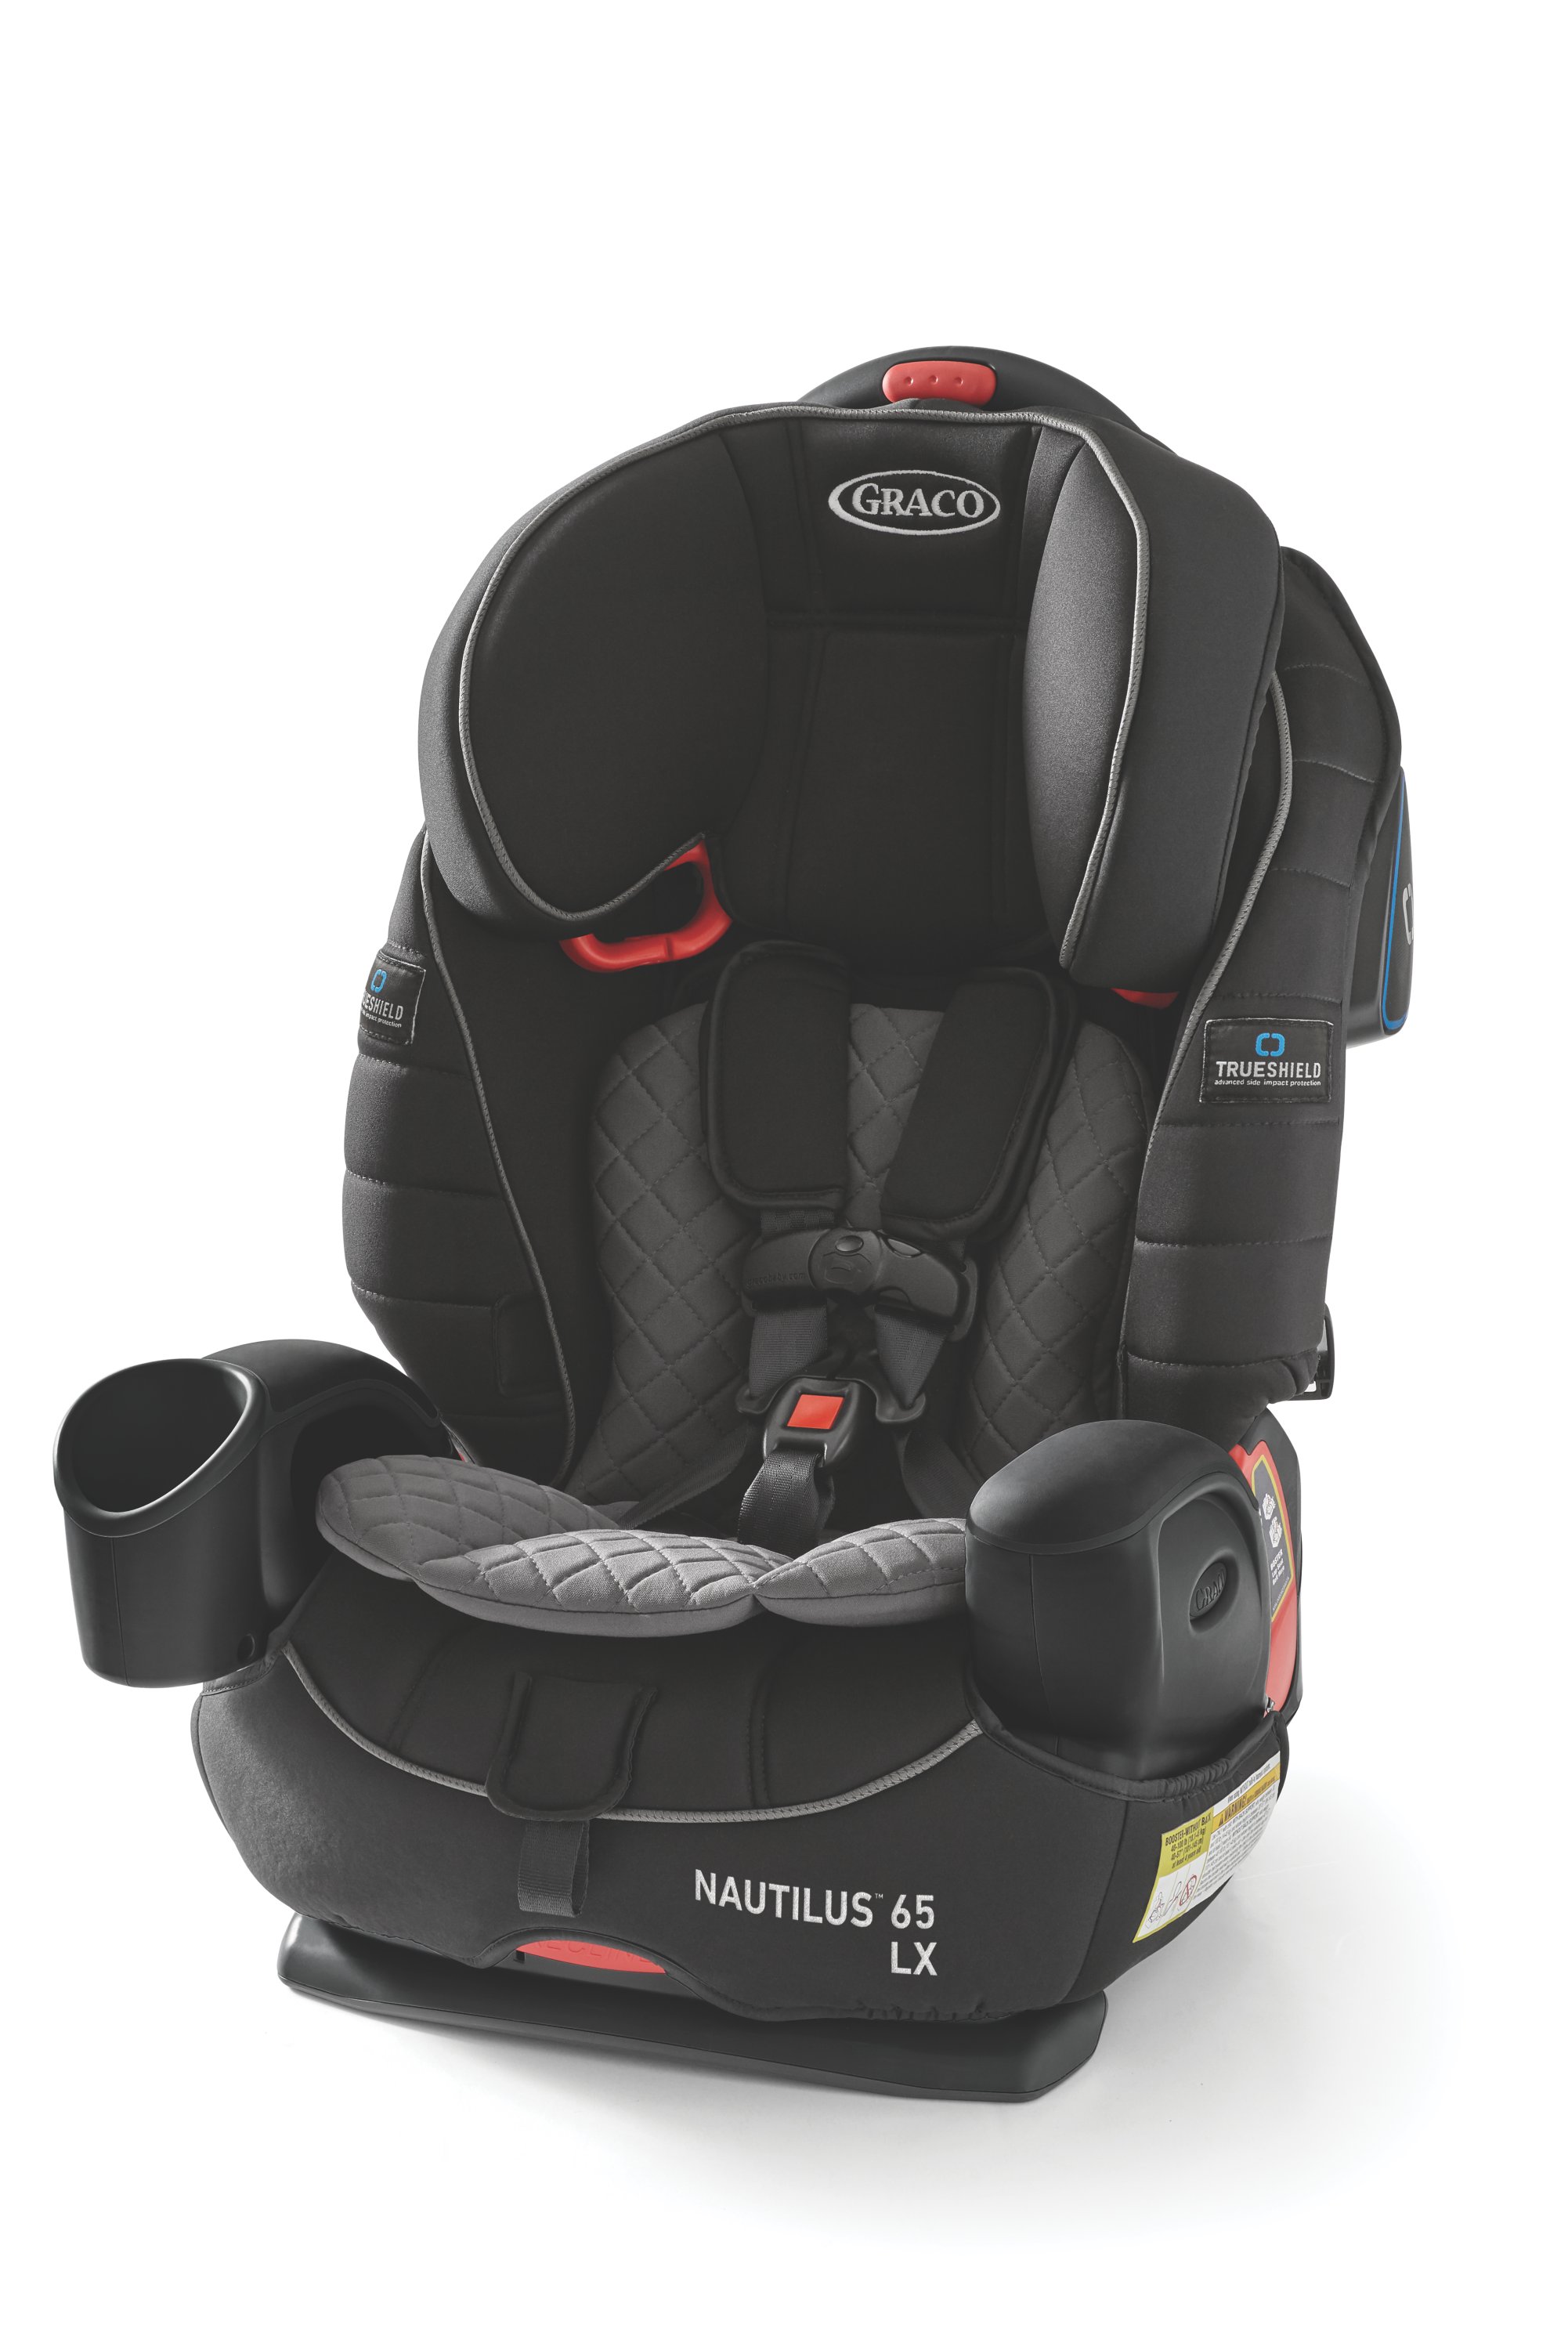 Graco Baby Nautilus 65 LX 3-in-1 Harness Booster Car Seat Child Safety Ion NEW 